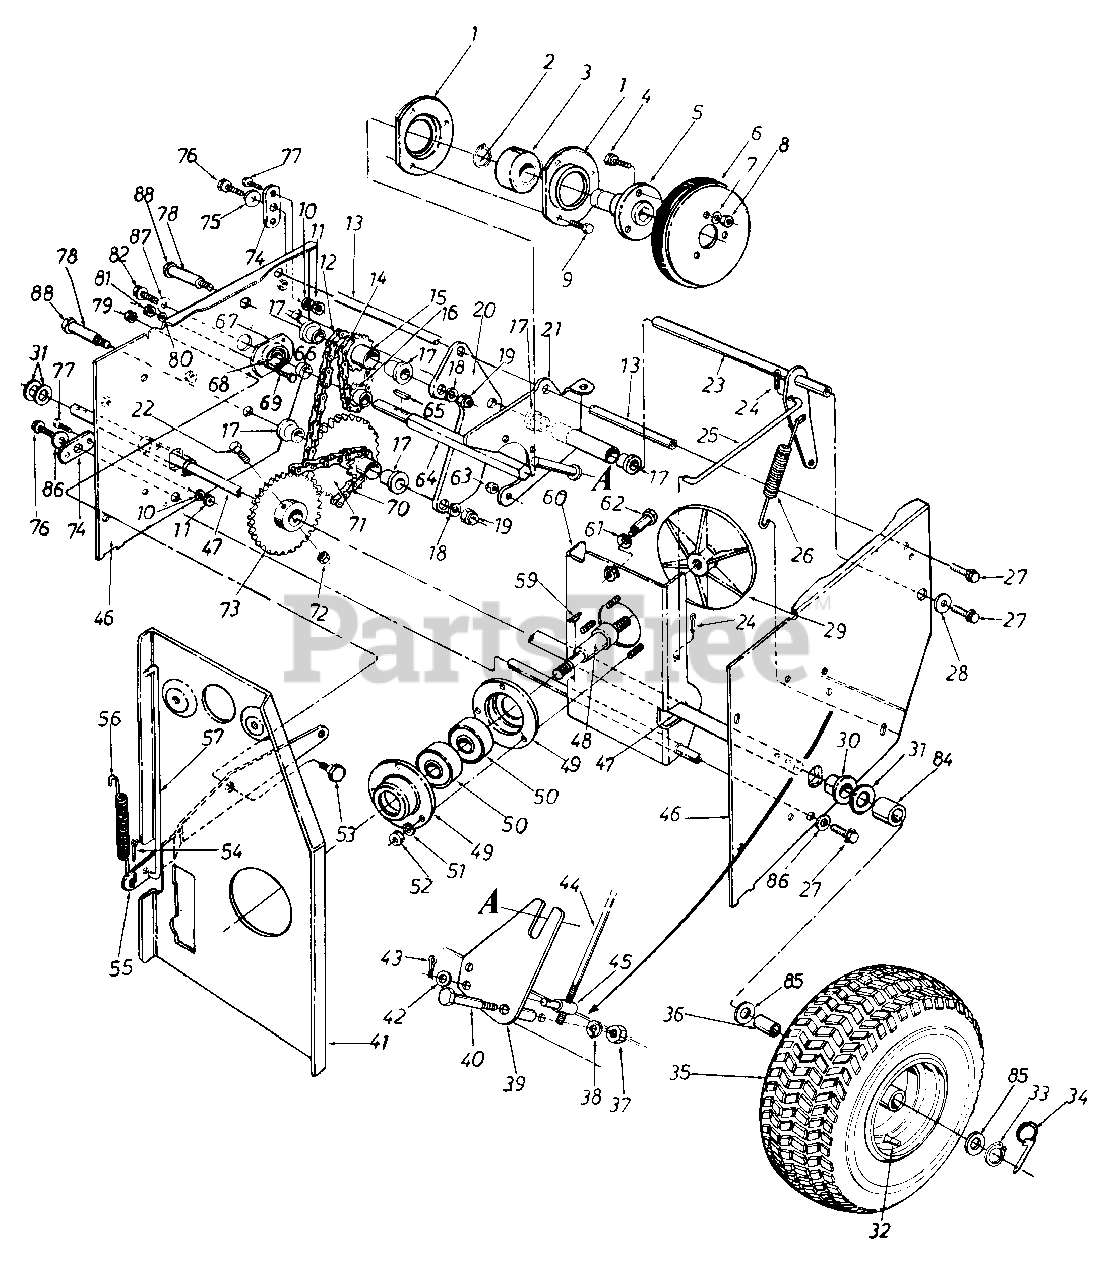 MTD 149-852-023 - MTD Snow Thrower (1989) (Andersons) Parts Parts